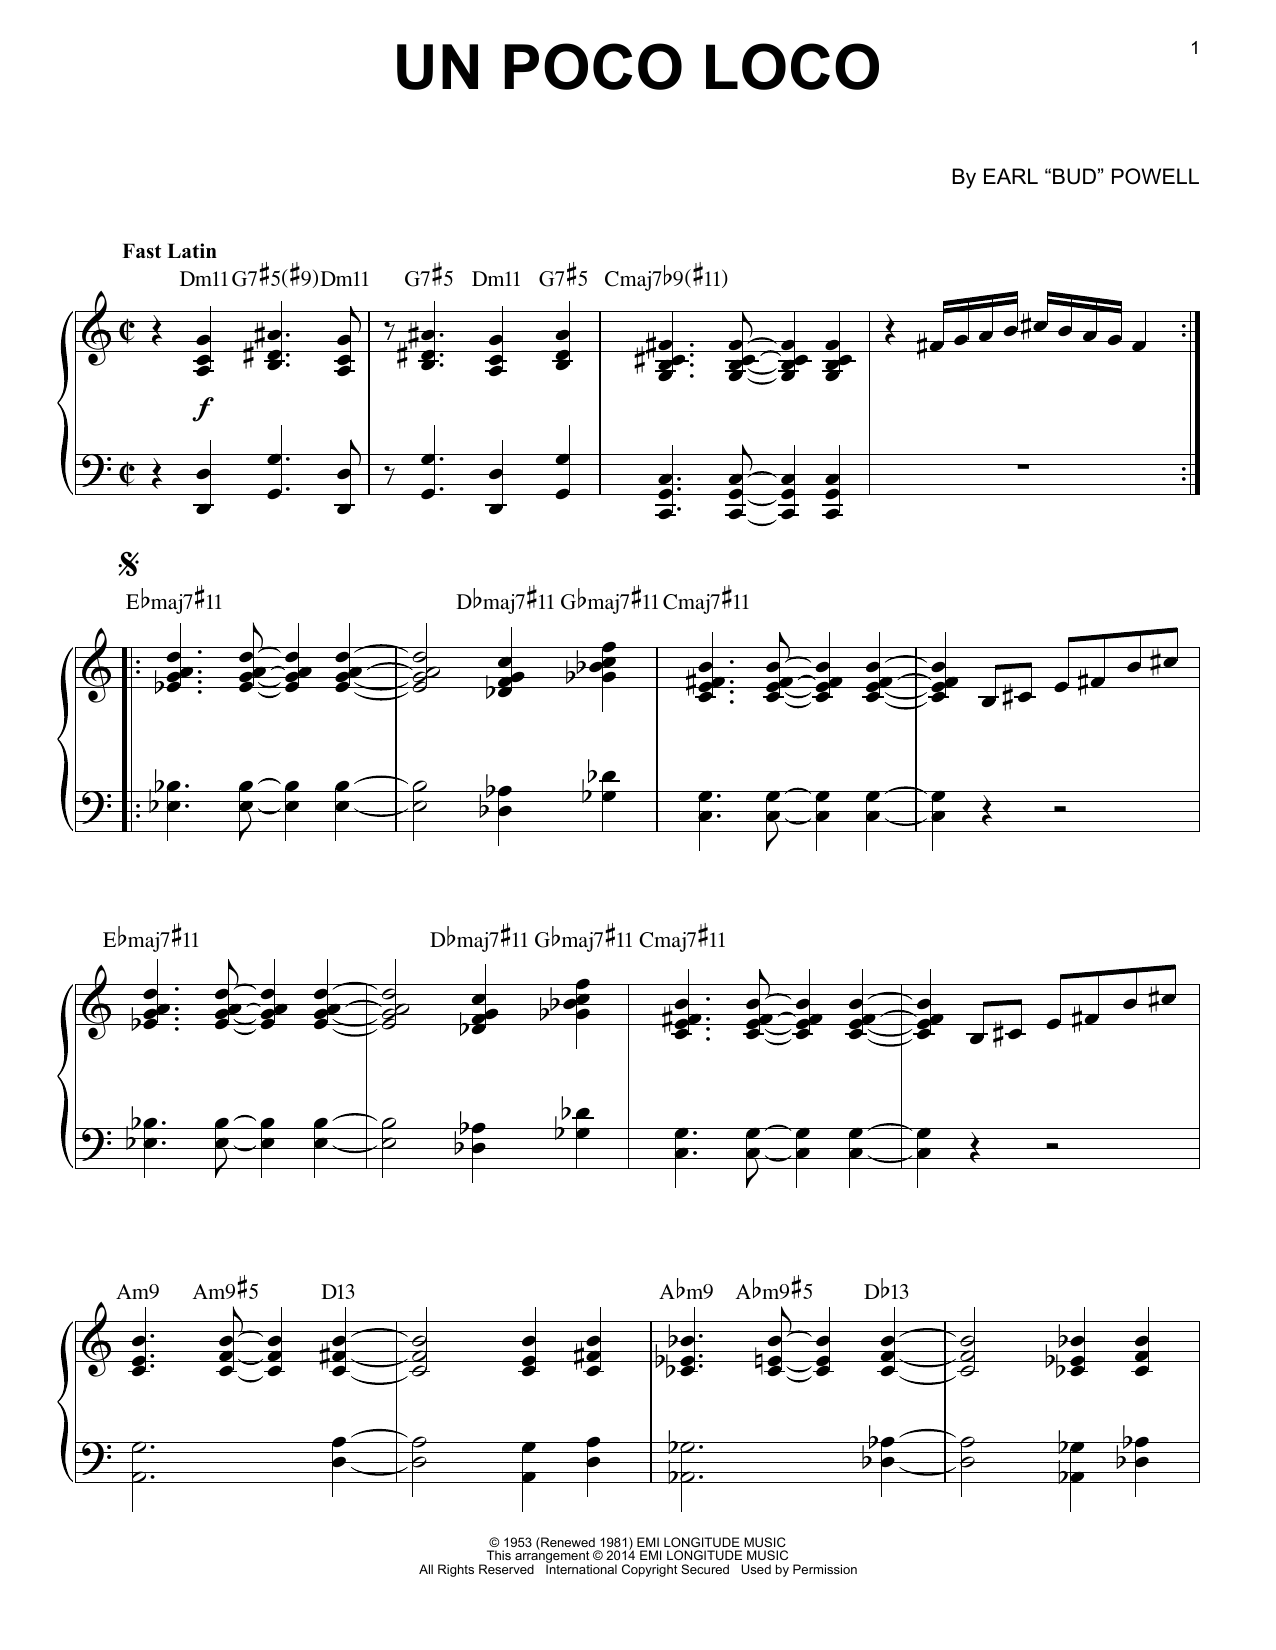 Un Poco Loco Jazz sheet music, notes and chords for Piano, SKU: 152657. she...